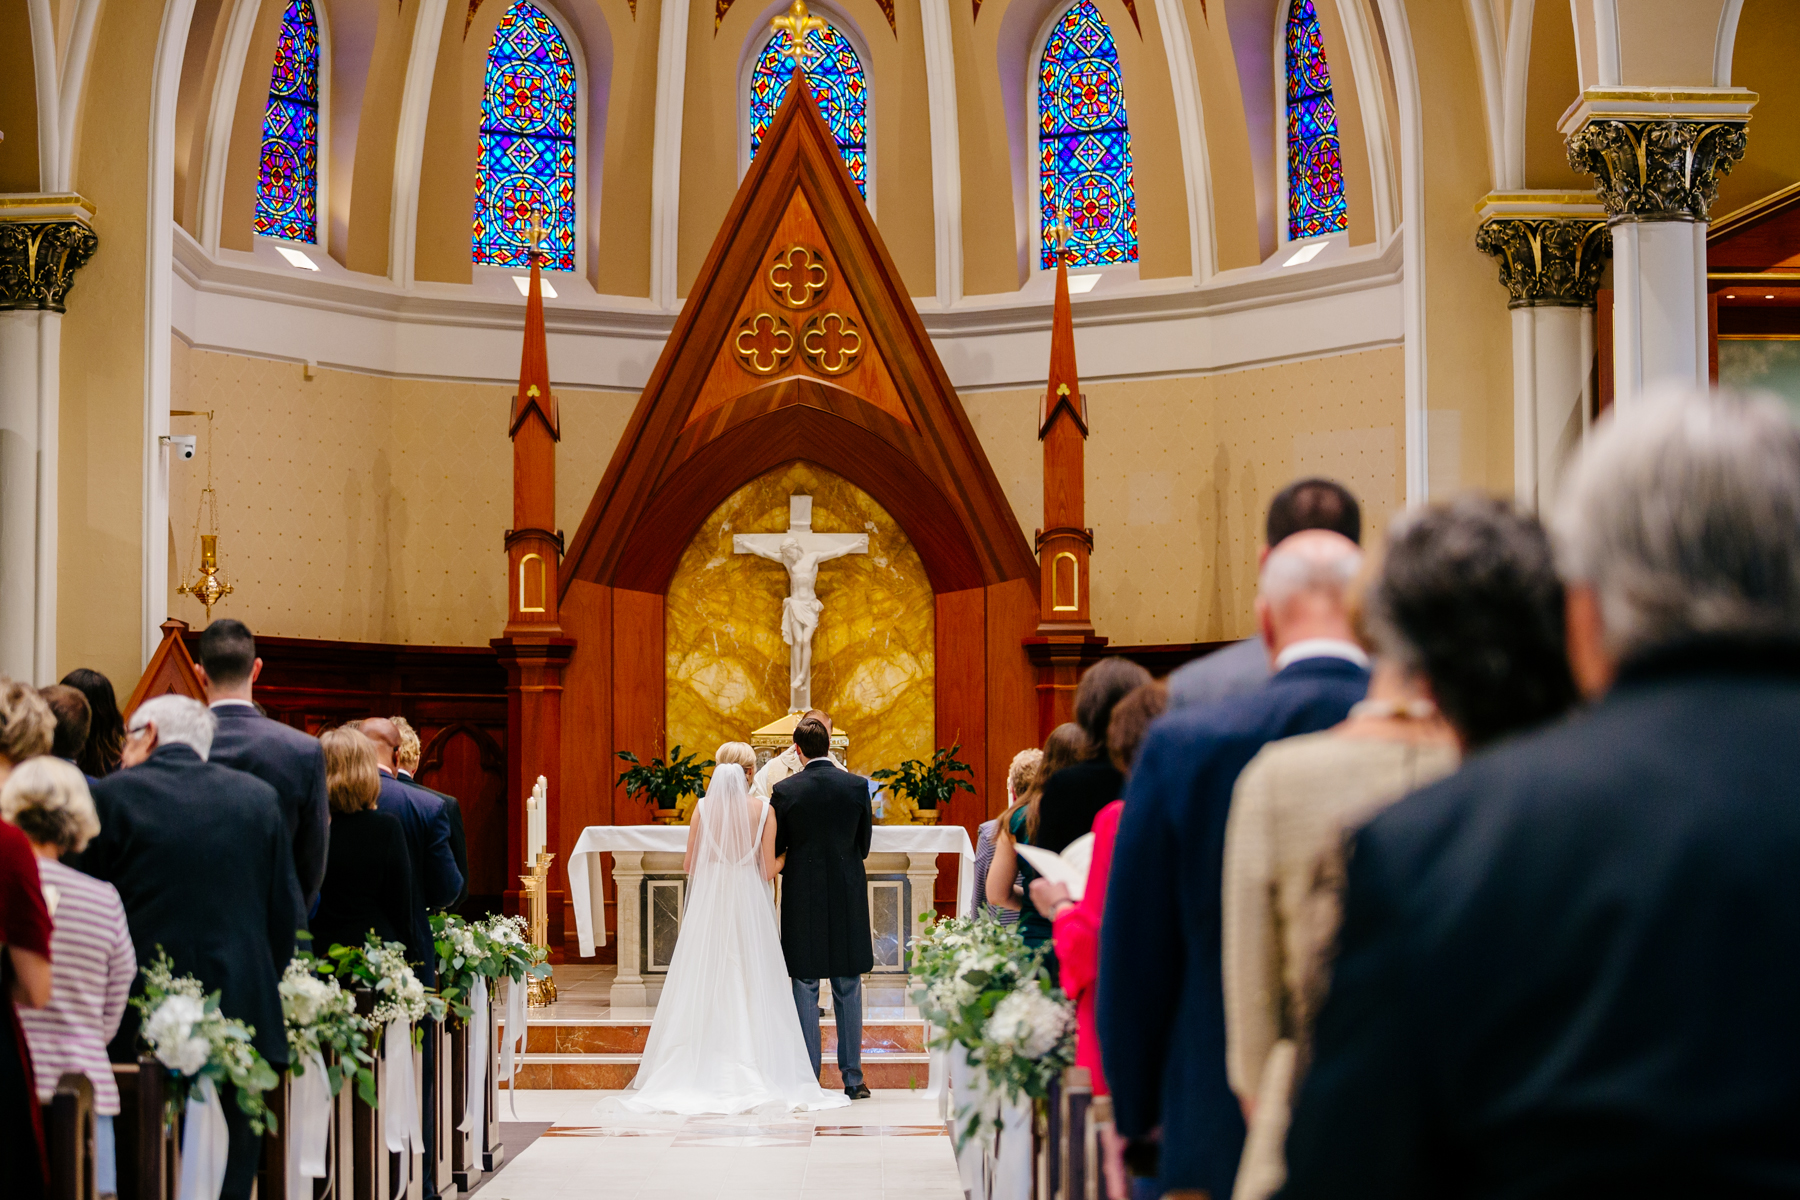 Wedding Ceremony at St. Mary's Cathedral in Saginaw